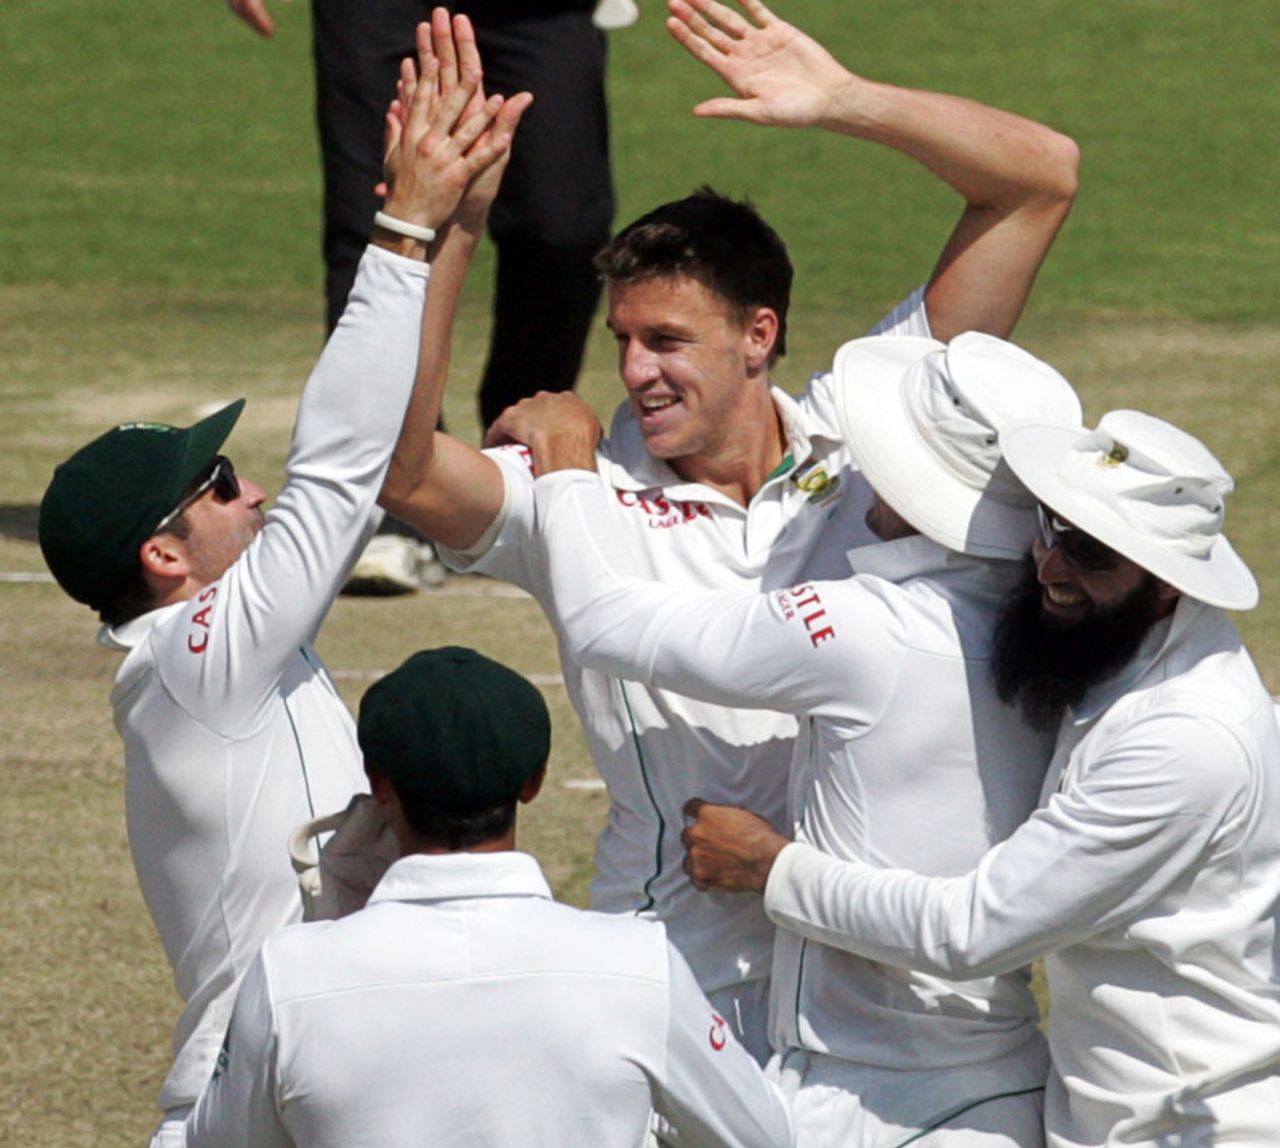 Morne Morkel is congratulated after a wicket, Zimbabwe v South Africa, only Test, Harare, 4th day, August 12, 2014